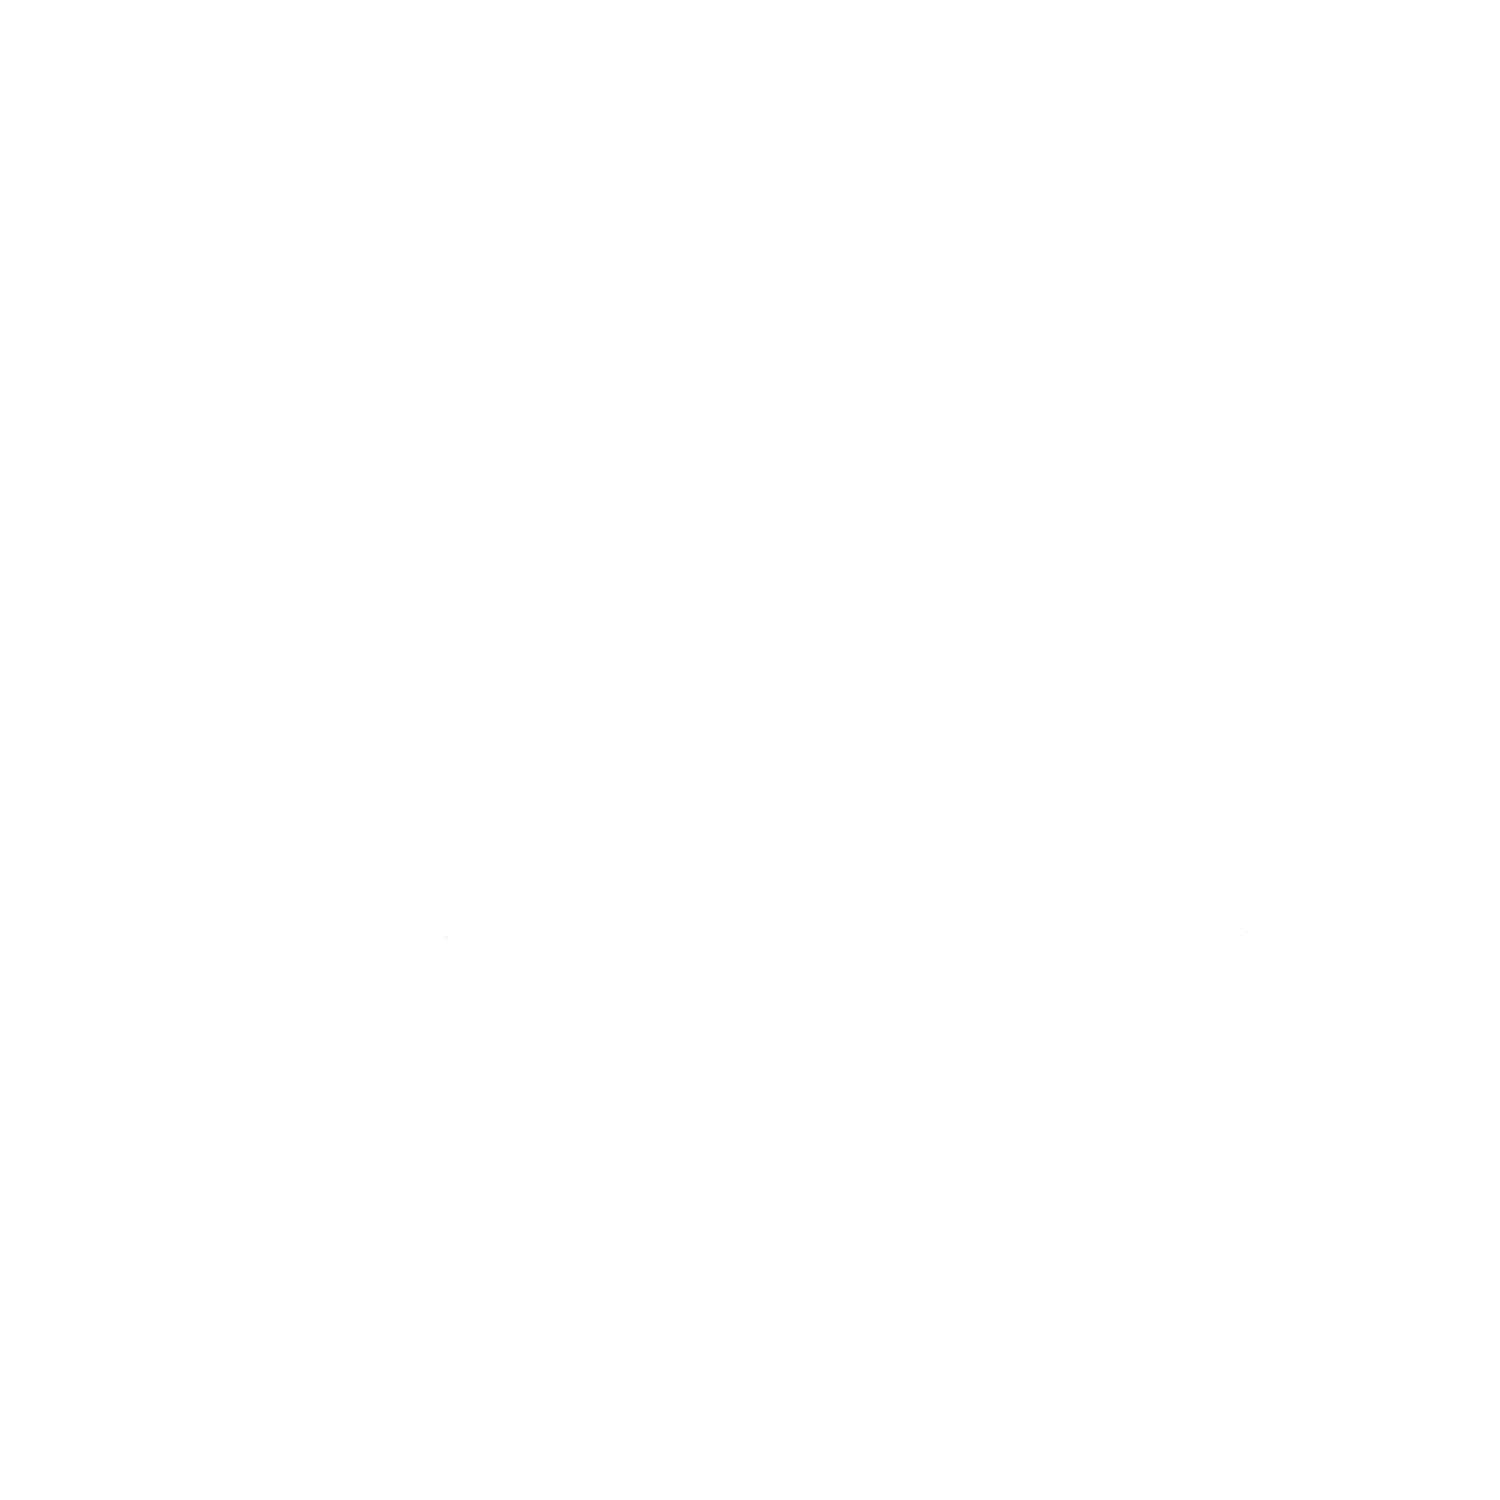 Dirty Laundry 